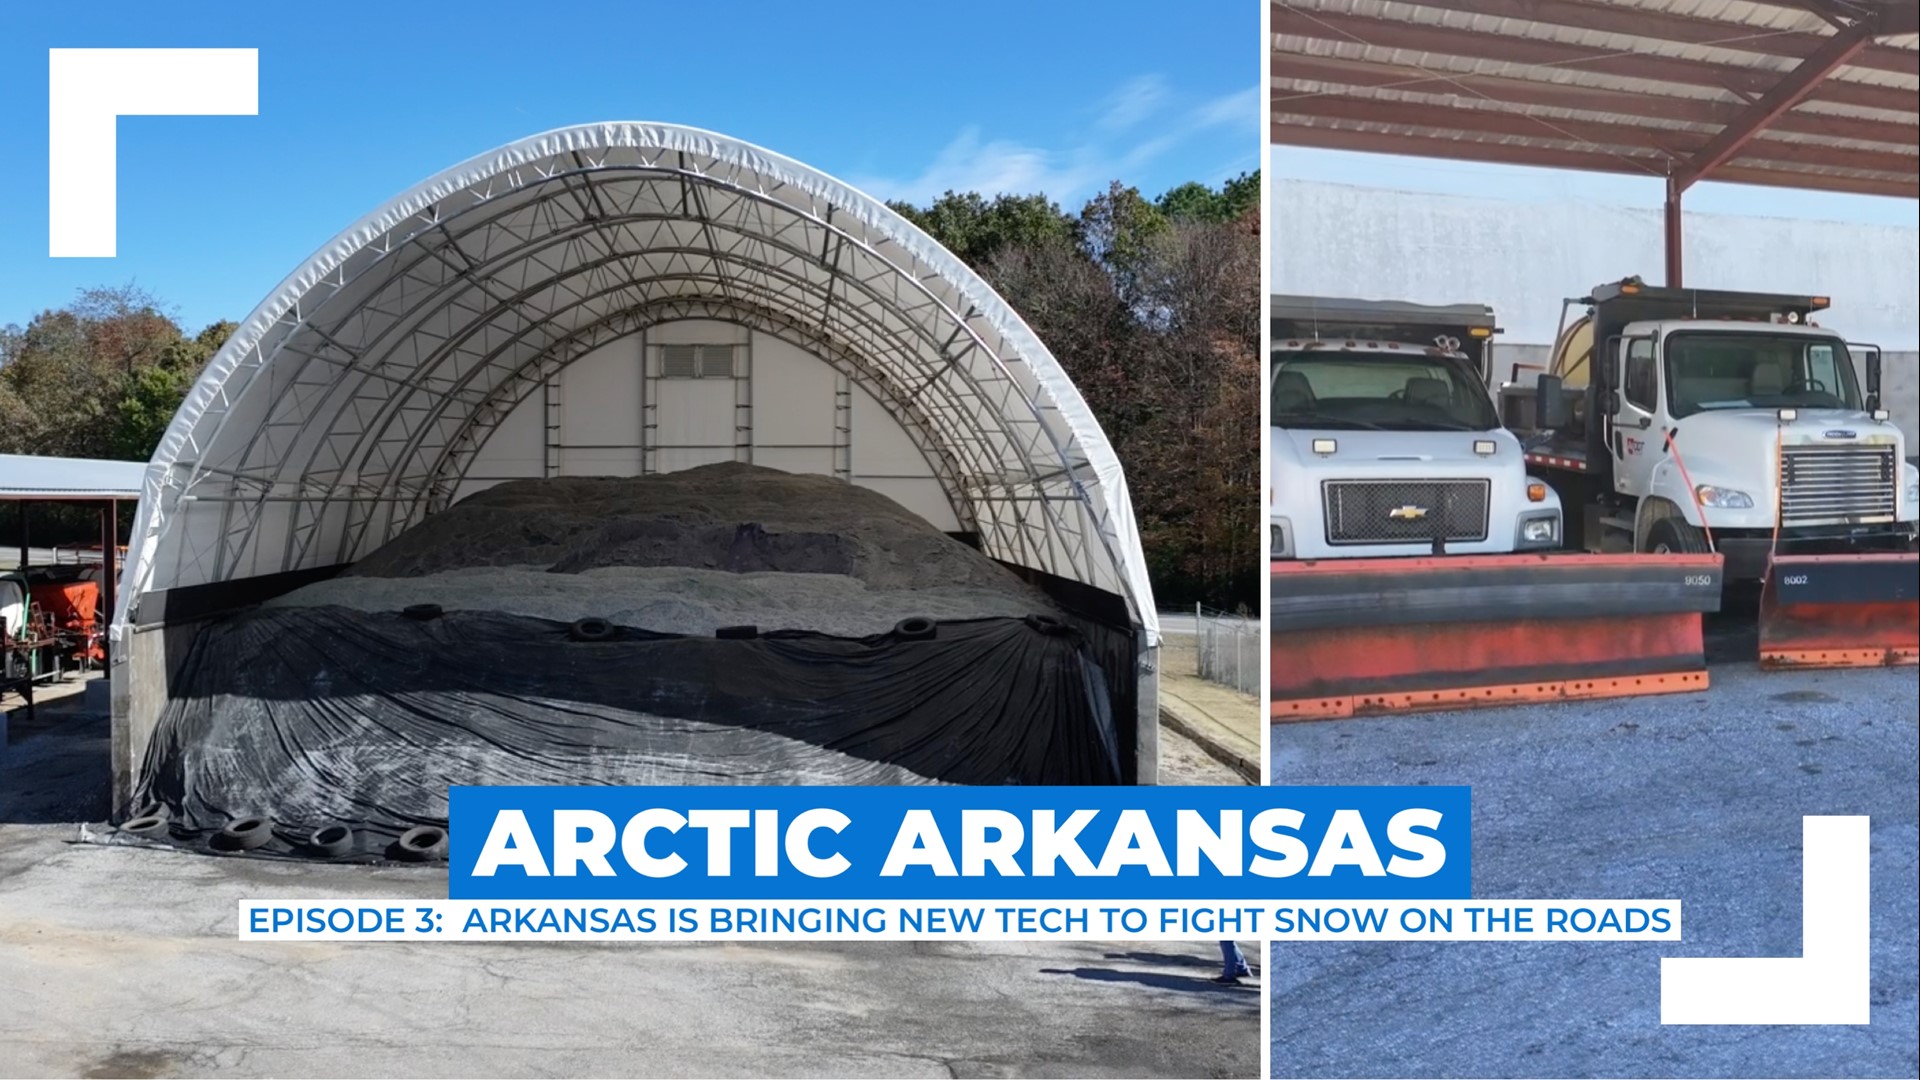 Arkansas has made major investments to help make treating roads for ice and snow more effective and more efficient with new technology.